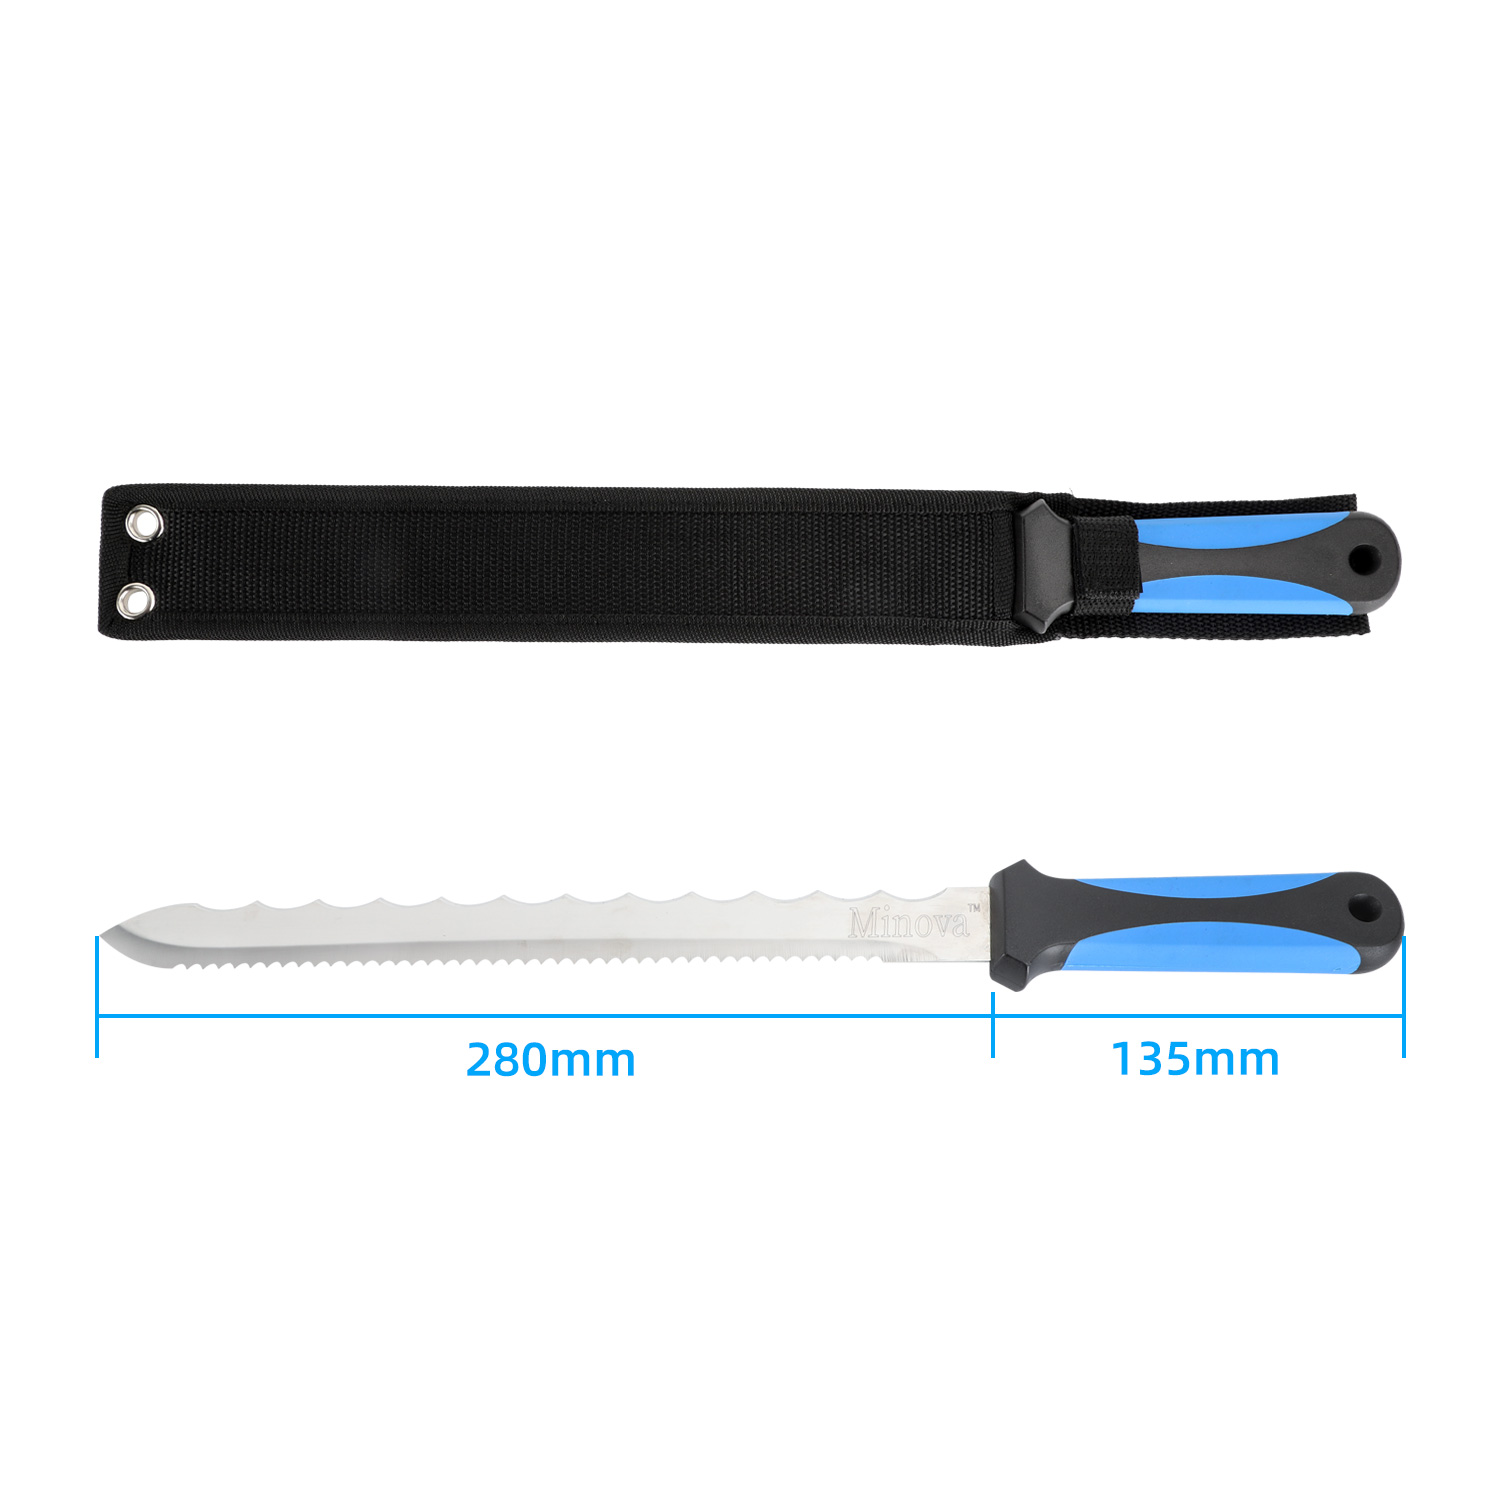 MINOVA KD-01280 & KD-01420 High Quality Stainless Steel Mineral Wool Knife For Cut